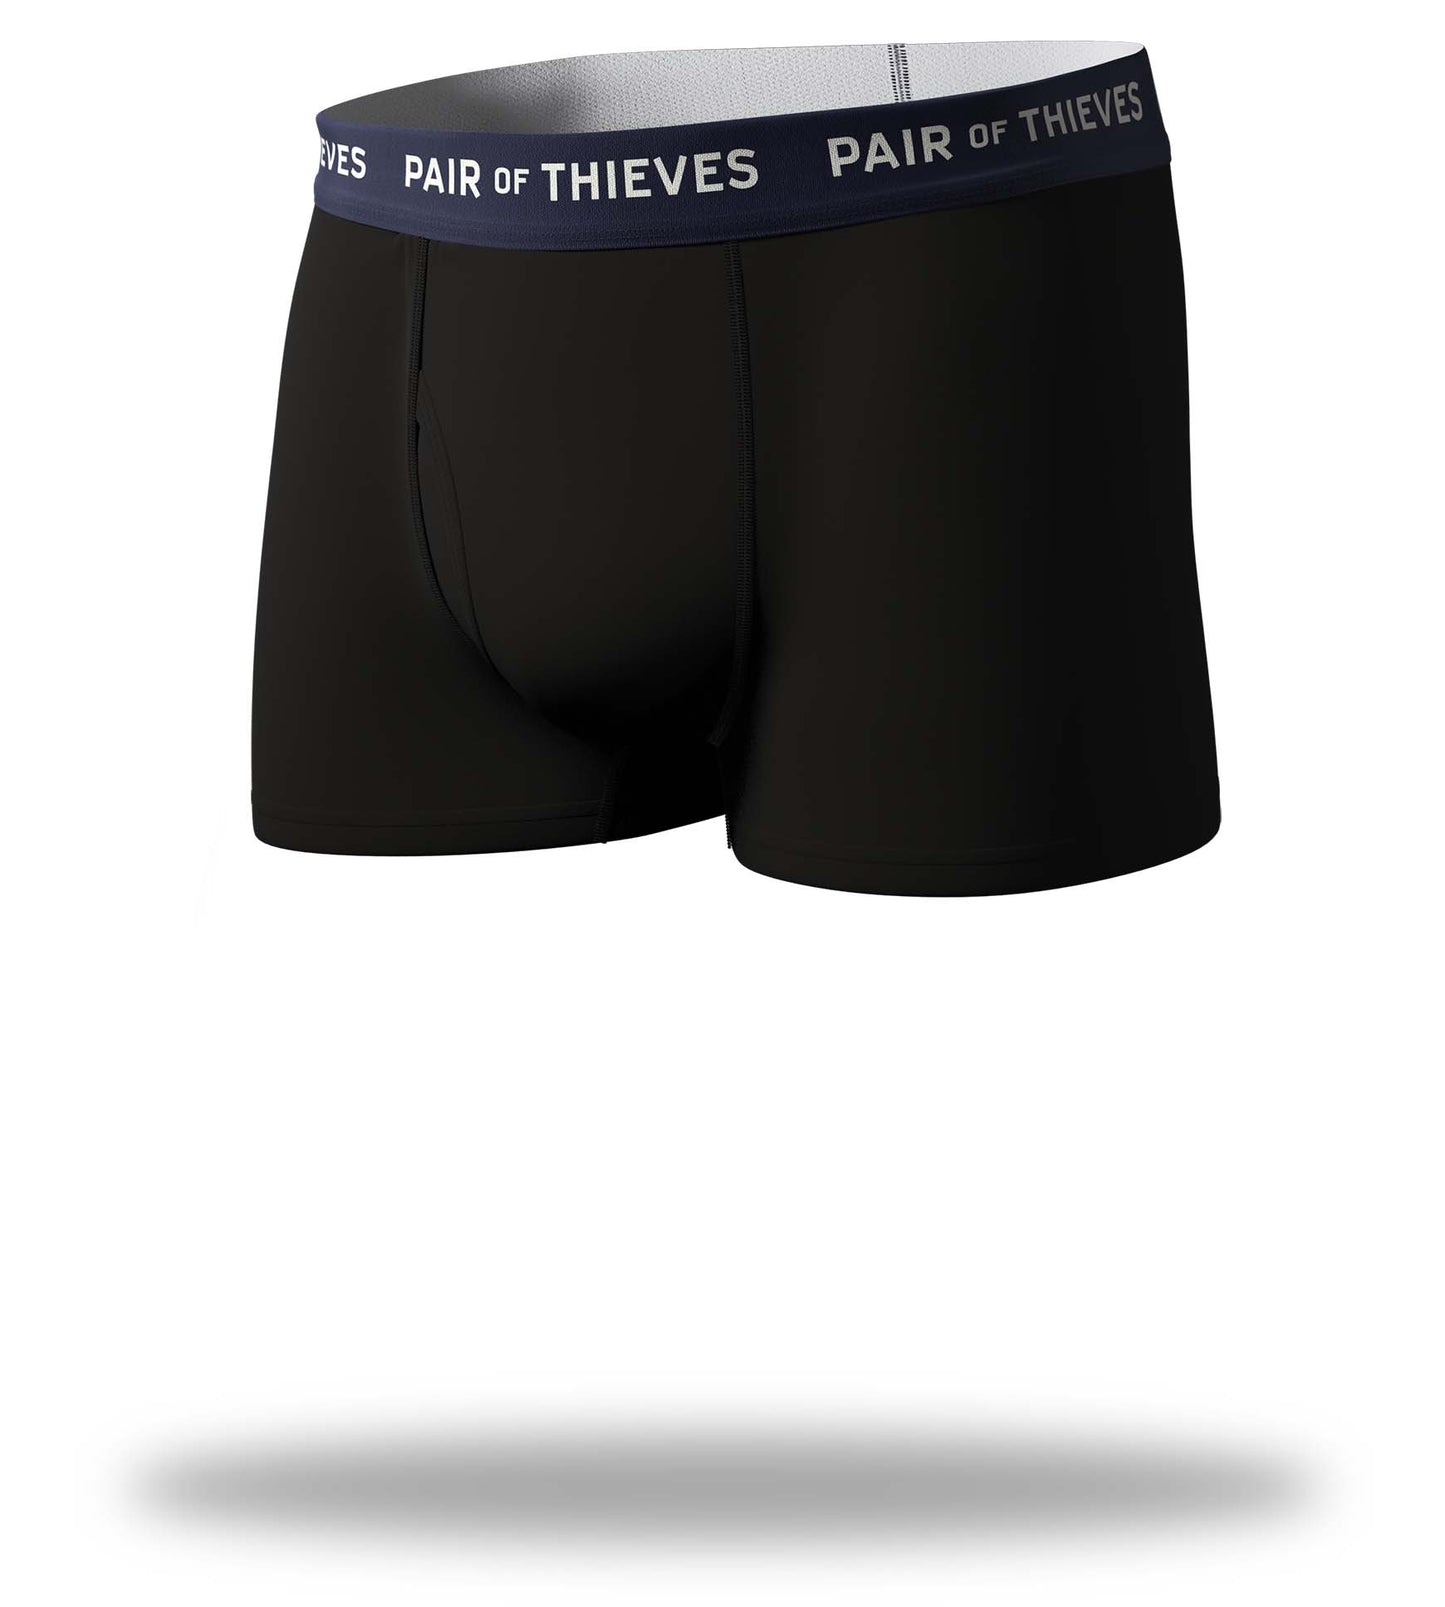 supersoft black trunk, black with white logo on navy waistband